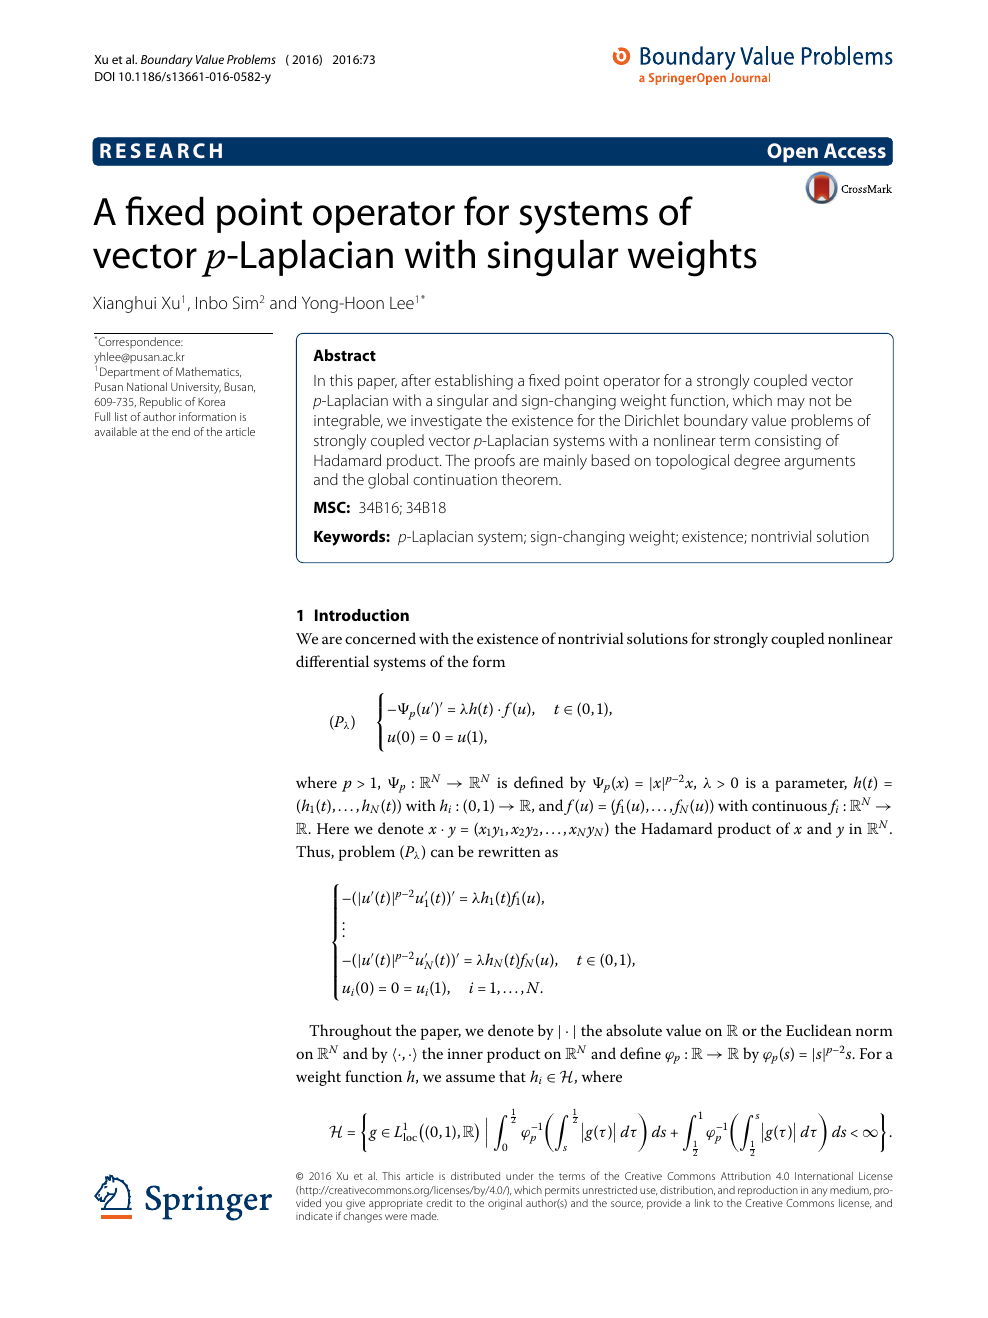 A Fixed Point Operator For Systems Of Vector P Laplacian With Singular Weights Topic Of Research Paper In Mathematics Download Scholarly Article Pdf And Read For Free On Cyberleninka Open Science Hub